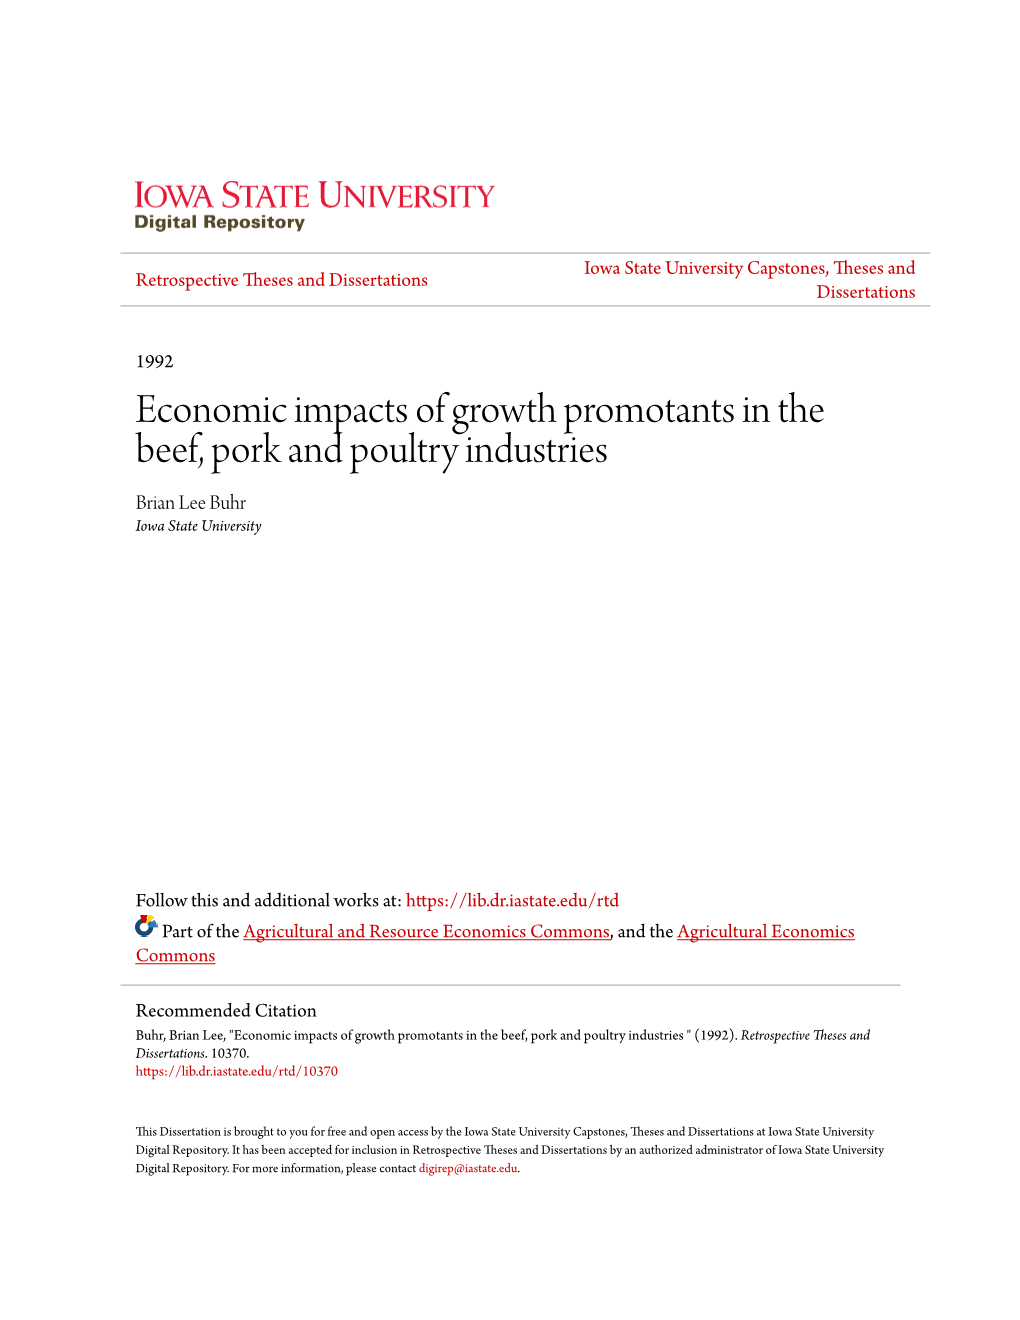 Economic Impacts of Growth Promotants in the Beef, Pork and Poultry Industries Brian Lee Buhr Iowa State University